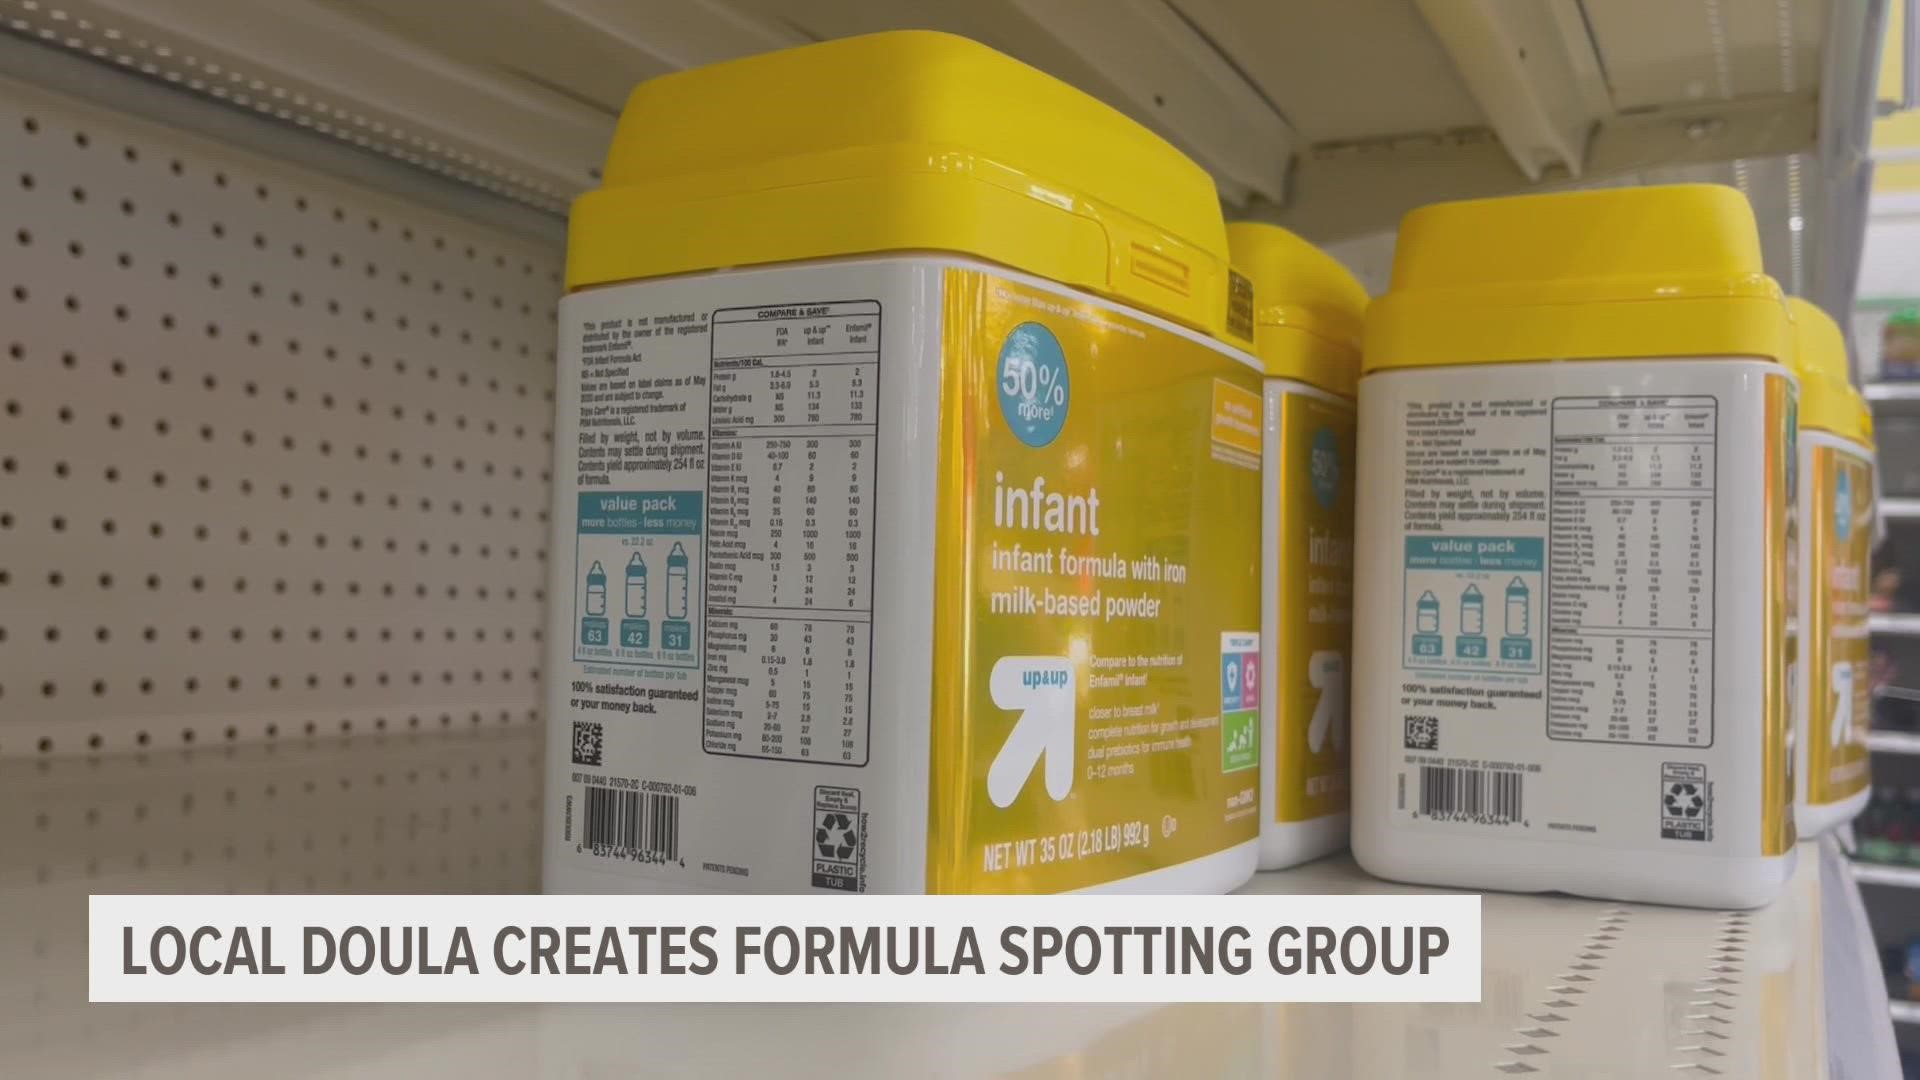 Many parents like Kaylie Johansen are desperate to find formula for their babies. Here's how one Facebook page is helping.